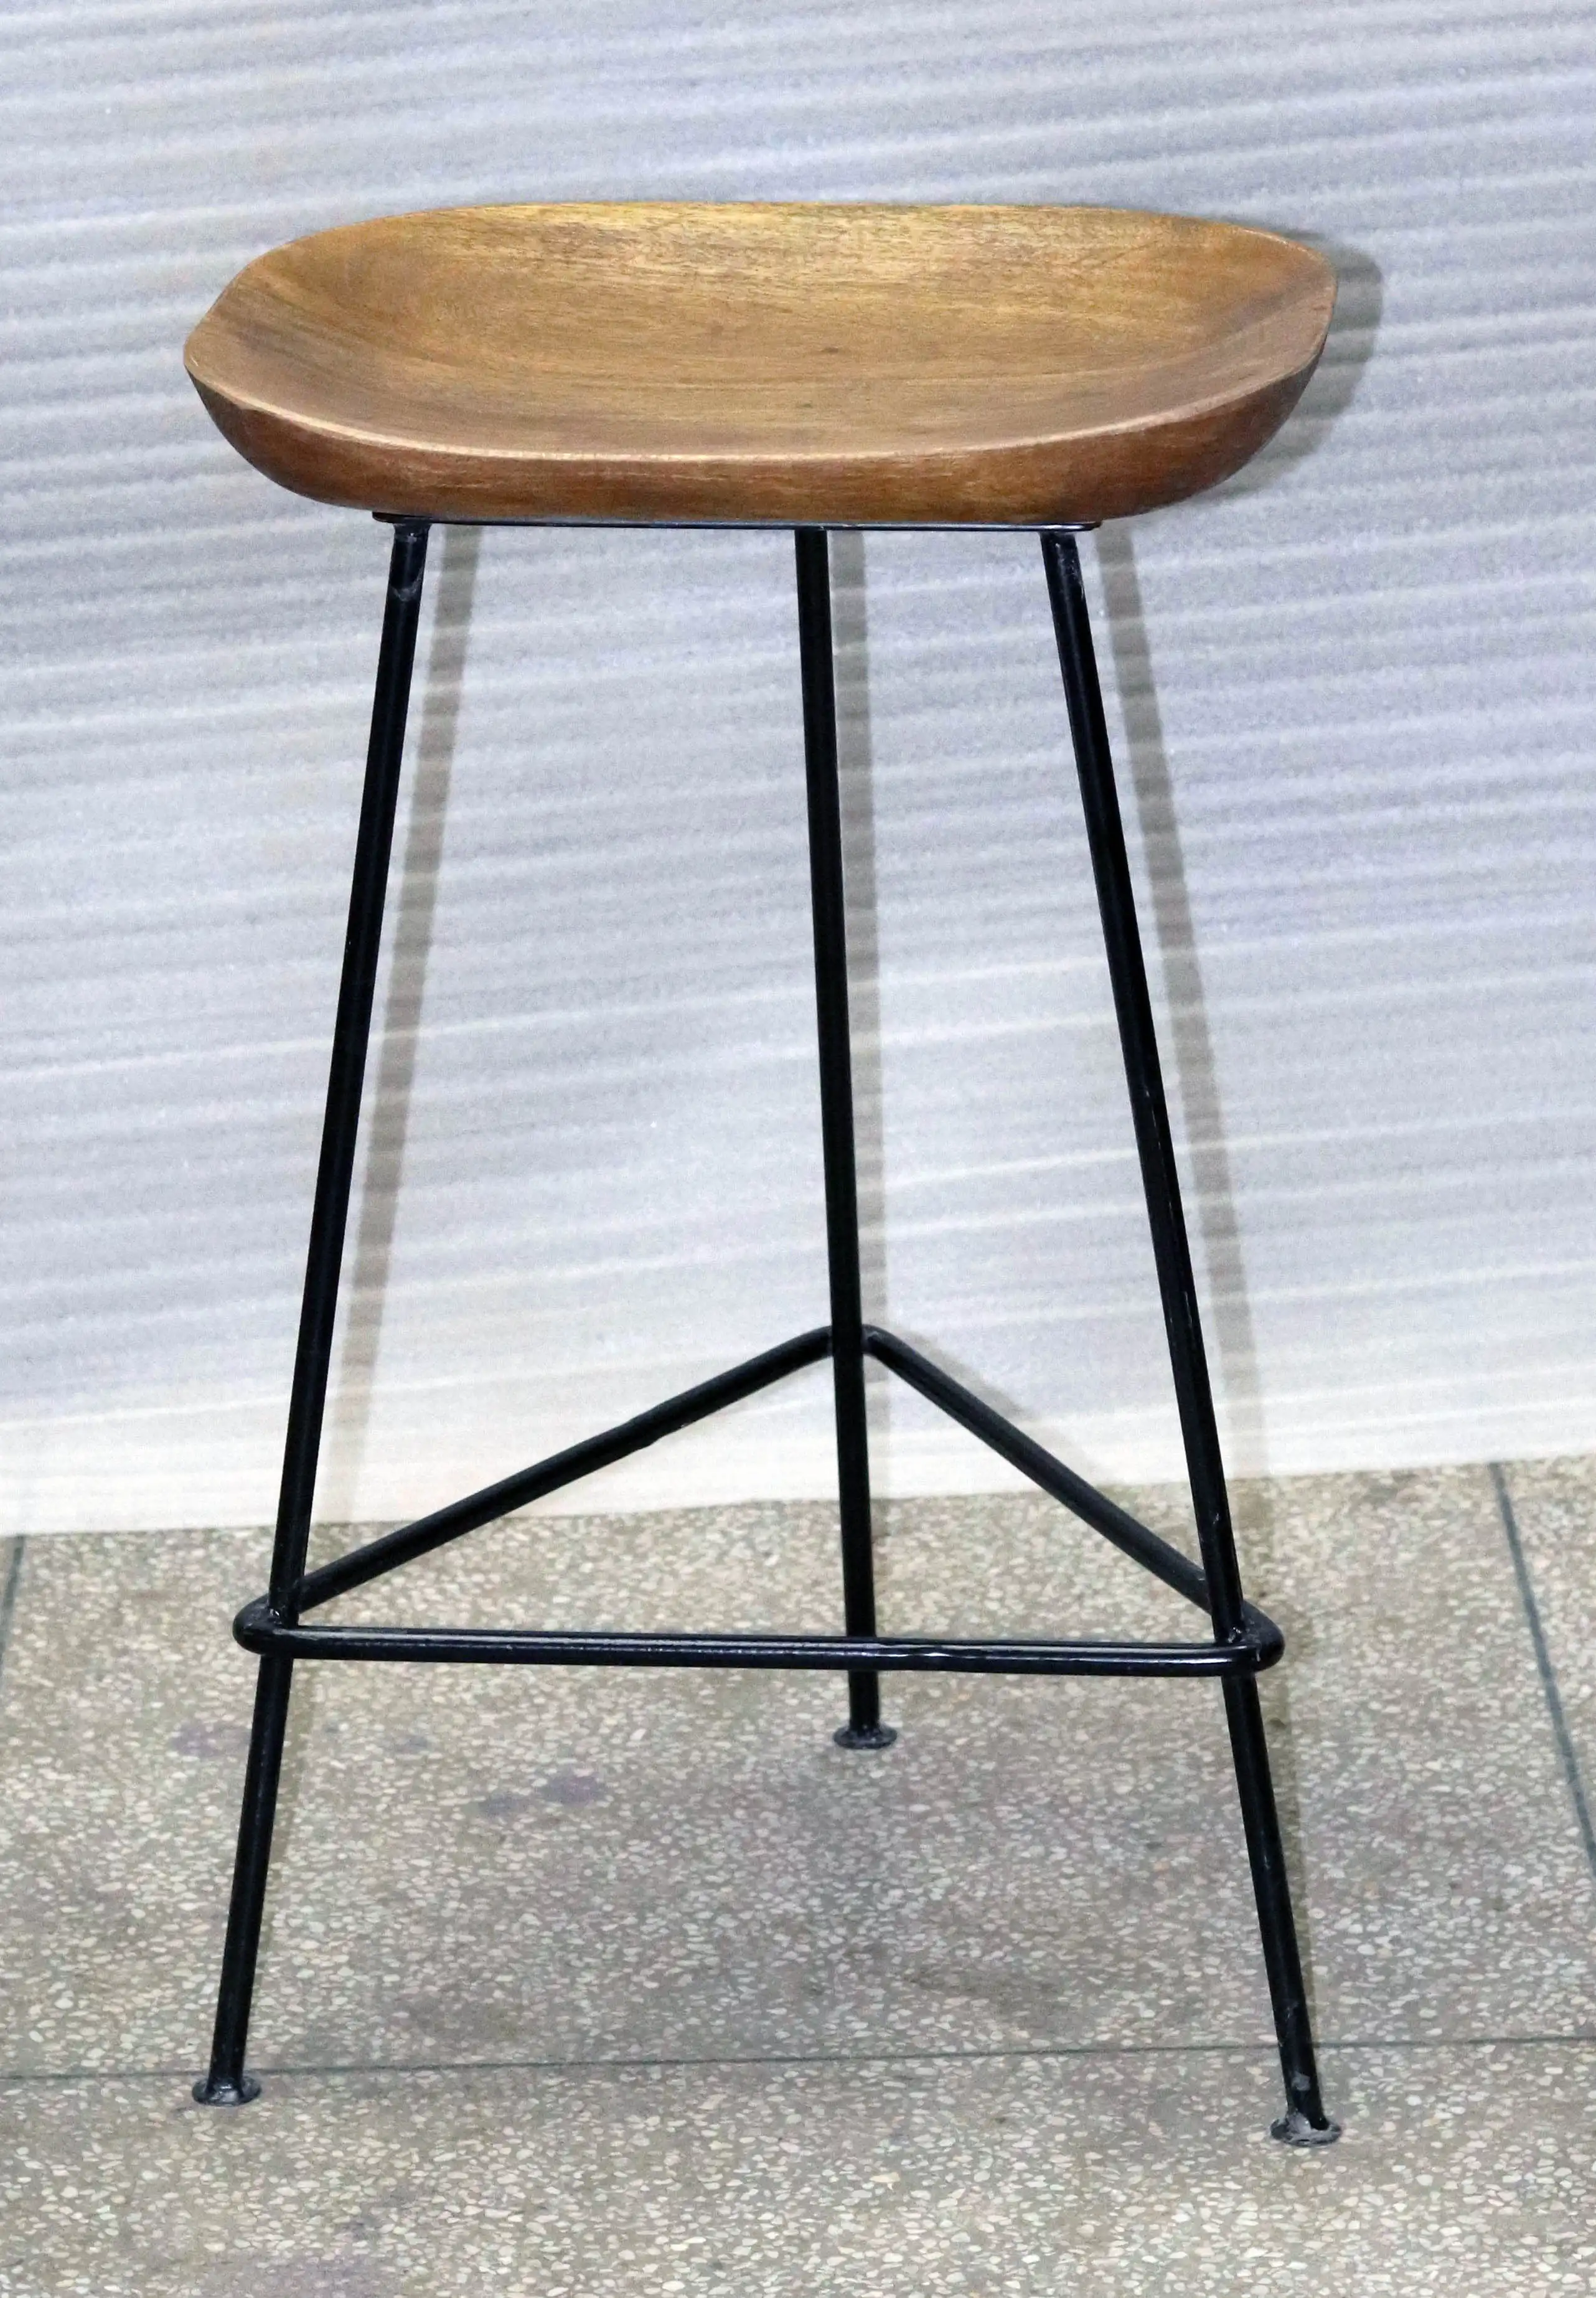 Iron Round Stool with Wooden Top ( Top is Knock Down) - popular handicrafts